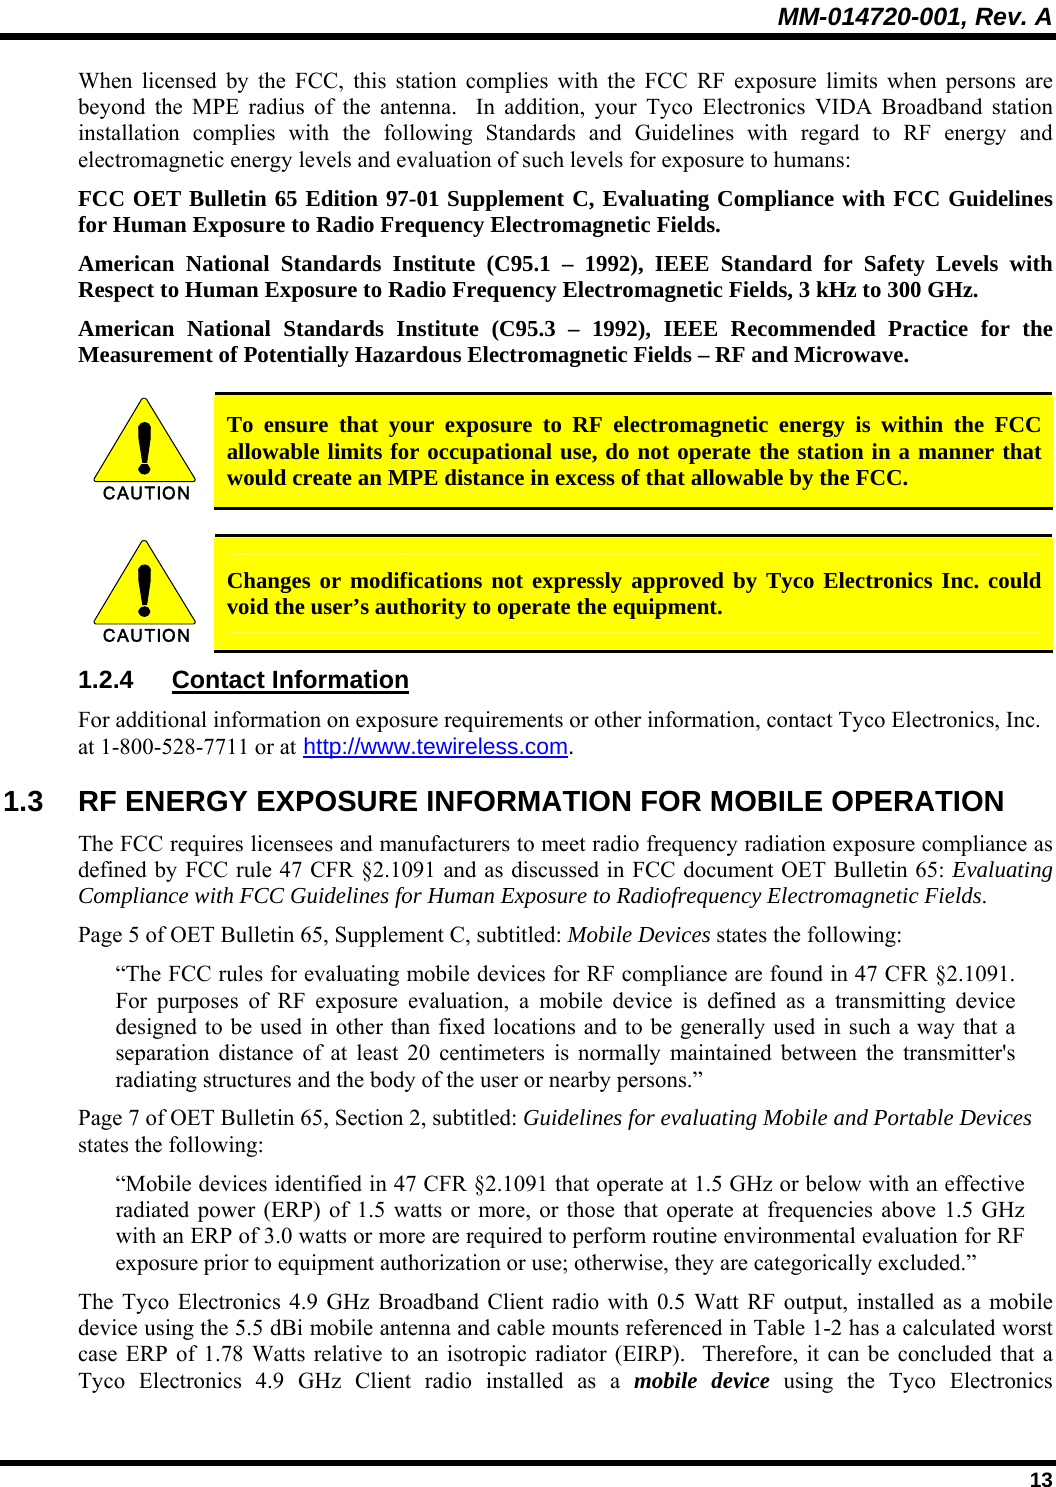 MM-014720-001, Rev. A  13 When licensed by the FCC, this station complies with the FCC RF exposure limits when persons are beyond the MPE radius of the antenna.  In addition, your Tyco Electronics VIDA Broadband station installation complies with the following Standards and Guidelines with regard to RF energy and electromagnetic energy levels and evaluation of such levels for exposure to humans:  FCC OET Bulletin 65 Edition 97-01 Supplement C, Evaluating Compliance with FCC Guidelines for Human Exposure to Radio Frequency Electromagnetic Fields. American National Standards Institute (C95.1 – 1992), IEEE Standard for Safety Levels with Respect to Human Exposure to Radio Frequency Electromagnetic Fields, 3 kHz to 300 GHz. American National Standards Institute (C95.3 – 1992), IEEE Recommended Practice for the Measurement of Potentially Hazardous Electromagnetic Fields – RF and Microwave.  CAUTION  To ensure that your exposure to RF electromagnetic energy is within the FCC allowable limits for occupational use, do not operate the station in a manner that would create an MPE distance in excess of that allowable by the FCC.  CAUTION  Changes or modifications not expressly approved by Tyco Electronics Inc. could void the user’s authority to operate the equipment. 1.2.4 Contact Information For additional information on exposure requirements or other information, contact Tyco Electronics, Inc. at 1-800-528-7711 or at http://www.tewireless.com. 1.3  RF ENERGY EXPOSURE INFORMATION FOR MOBILE OPERATION The FCC requires licensees and manufacturers to meet radio frequency radiation exposure compliance as defined by FCC rule 47 CFR §2.1091 and as discussed in FCC document OET Bulletin 65: Evaluating Compliance with FCC Guidelines for Human Exposure to Radiofrequency Electromagnetic Fields. Page 5 of OET Bulletin 65, Supplement C, subtitled: Mobile Devices states the following: “The FCC rules for evaluating mobile devices for RF compliance are found in 47 CFR §2.1091.  For purposes of RF exposure evaluation, a mobile device is defined as a transmitting device designed to be used in other than fixed locations and to be generally used in such a way that a separation distance of at least 20 centimeters is normally maintained between the transmitter&apos;s radiating structures and the body of the user or nearby persons.” Page 7 of OET Bulletin 65, Section 2, subtitled: Guidelines for evaluating Mobile and Portable Devices states the following: “Mobile devices identified in 47 CFR §2.1091 that operate at 1.5 GHz or below with an effective radiated power (ERP) of 1.5 watts or more, or those that operate at frequencies above 1.5 GHz with an ERP of 3.0 watts or more are required to perform routine environmental evaluation for RF exposure prior to equipment authorization or use; otherwise, they are categorically excluded.” The Tyco Electronics 4.9 GHz Broadband Client radio with 0.5 Watt RF output, installed as a mobile device using the 5.5 dBi mobile antenna and cable mounts referenced in Table 1-2 has a calculated worst case ERP of 1.78 Watts relative to an isotropic radiator (EIRP).  Therefore, it can be concluded that a Tyco Electronics 4.9 GHz Client radio installed as a mobile device using the Tyco Electronics 